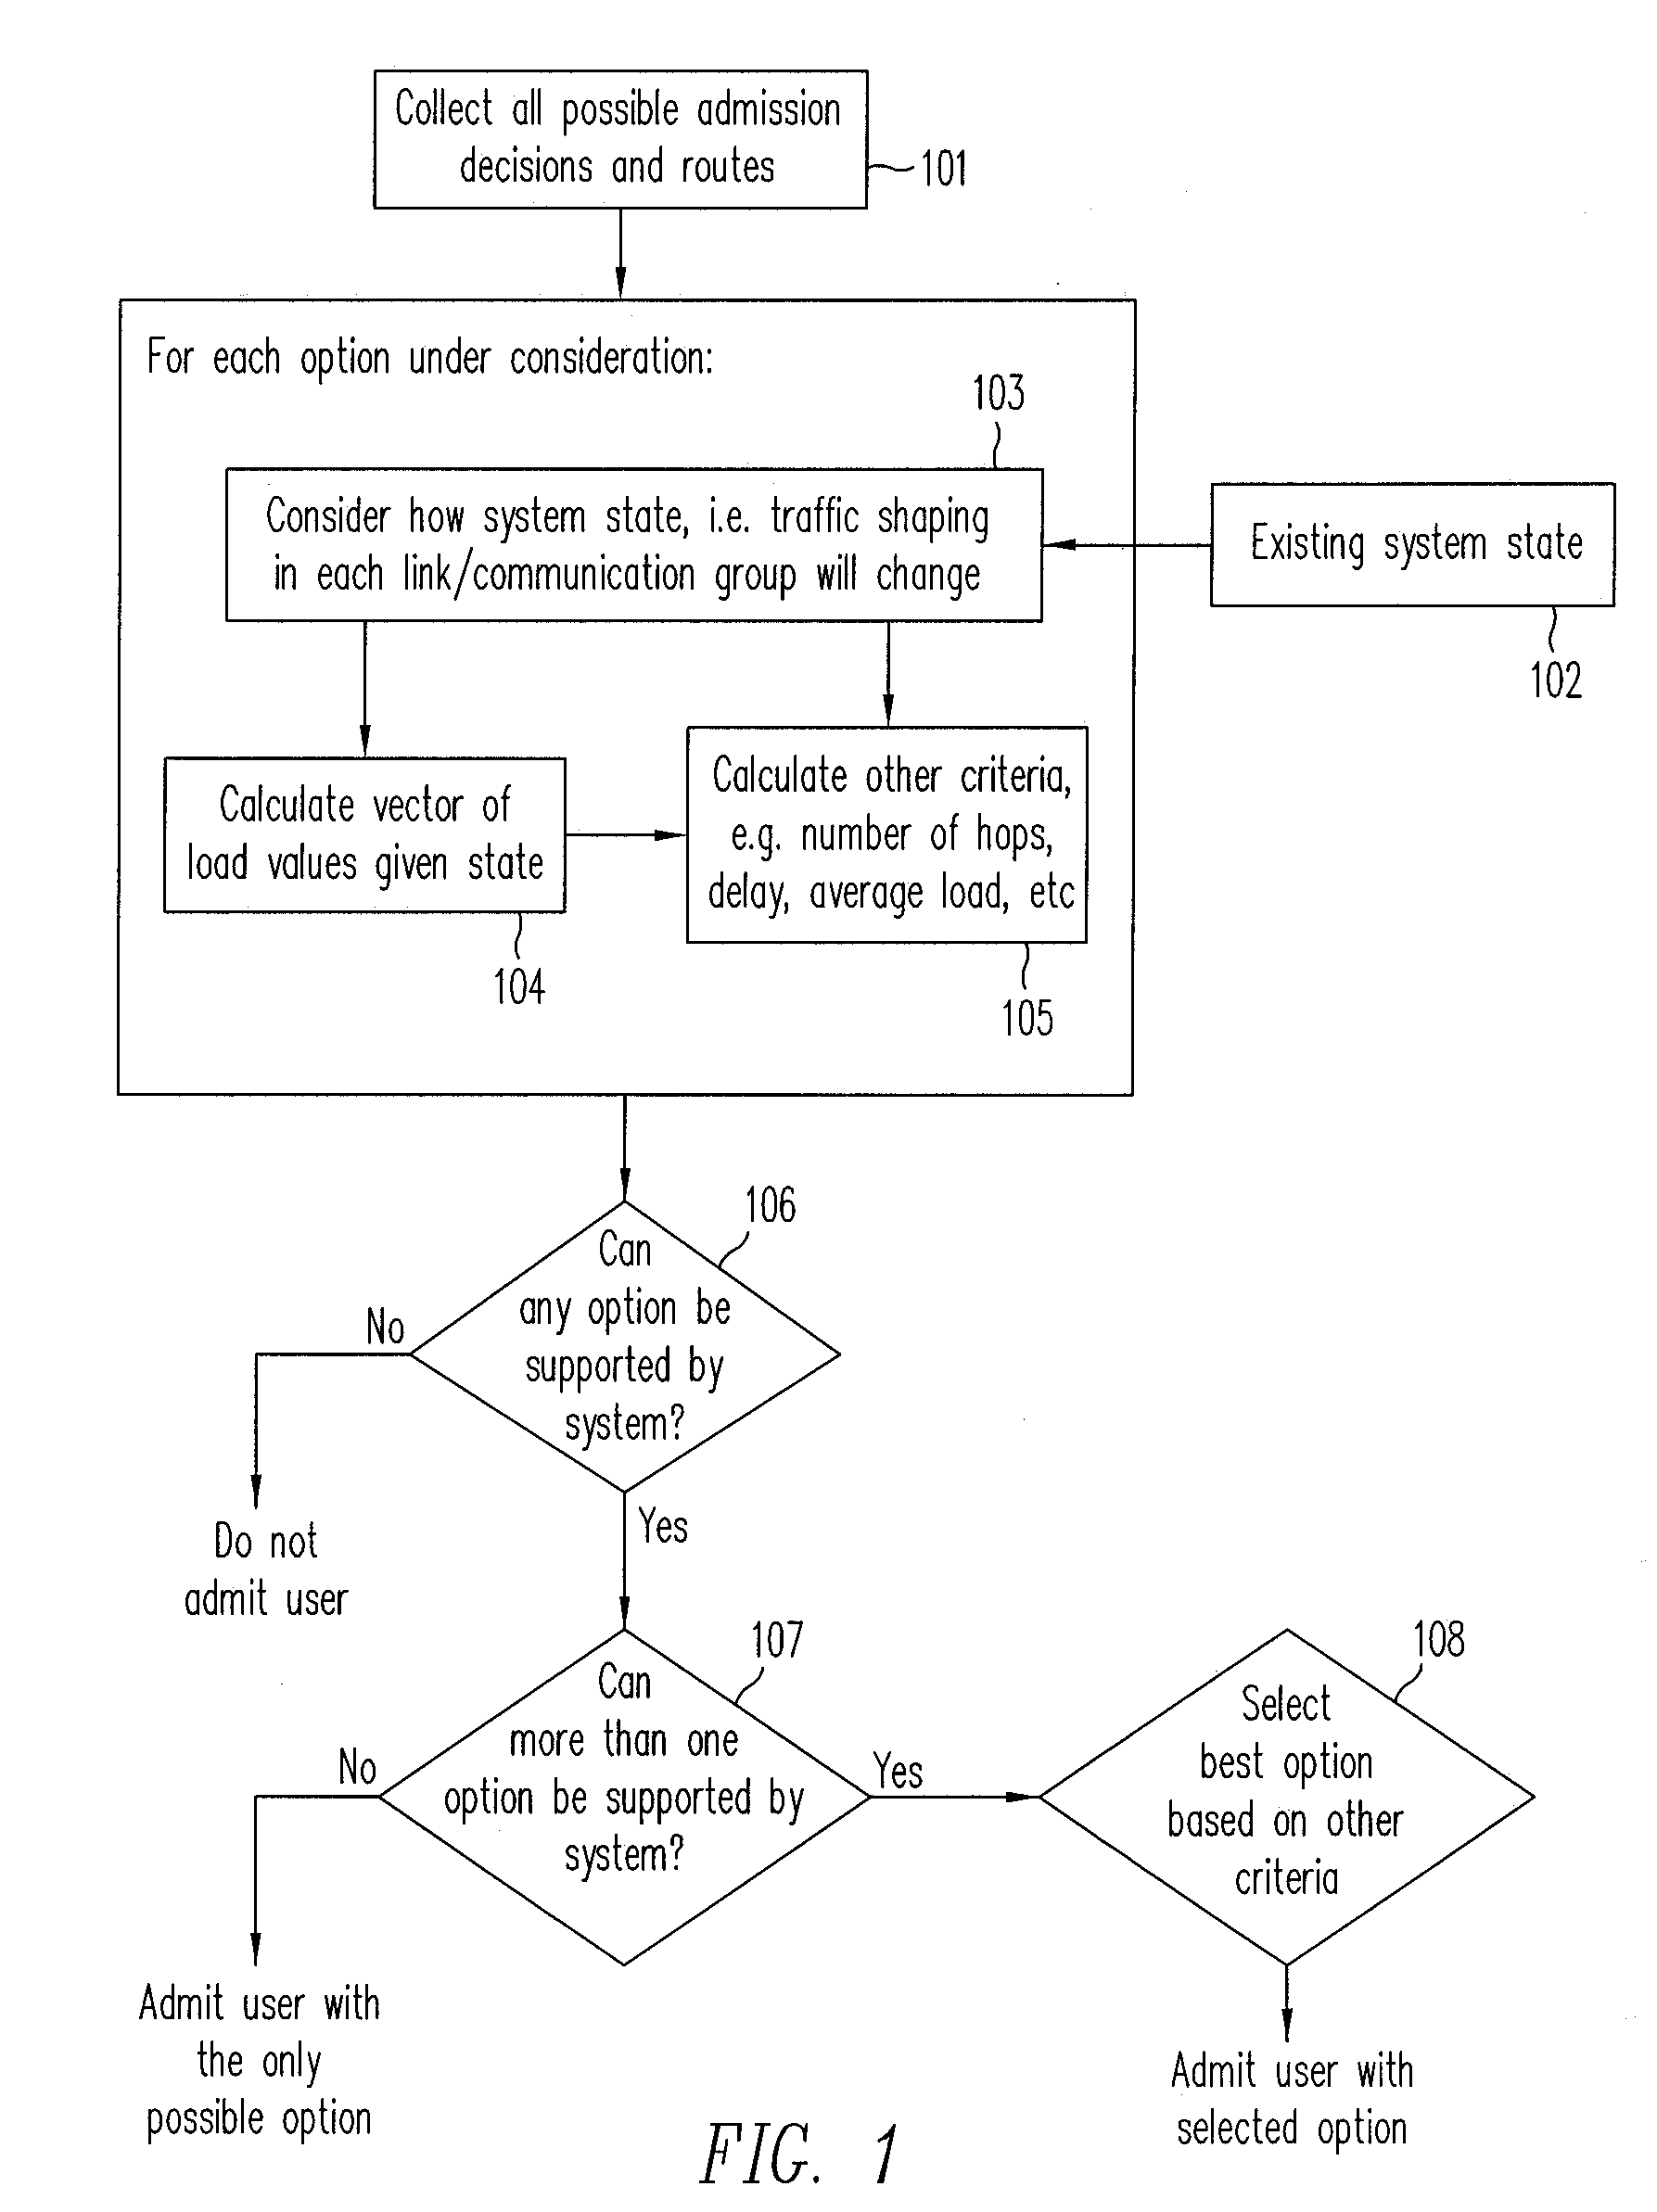 Method and apparatus for managing admission and routing in multi-hop 802.11 networks taking into consideration traffic shaping at intermediate hops